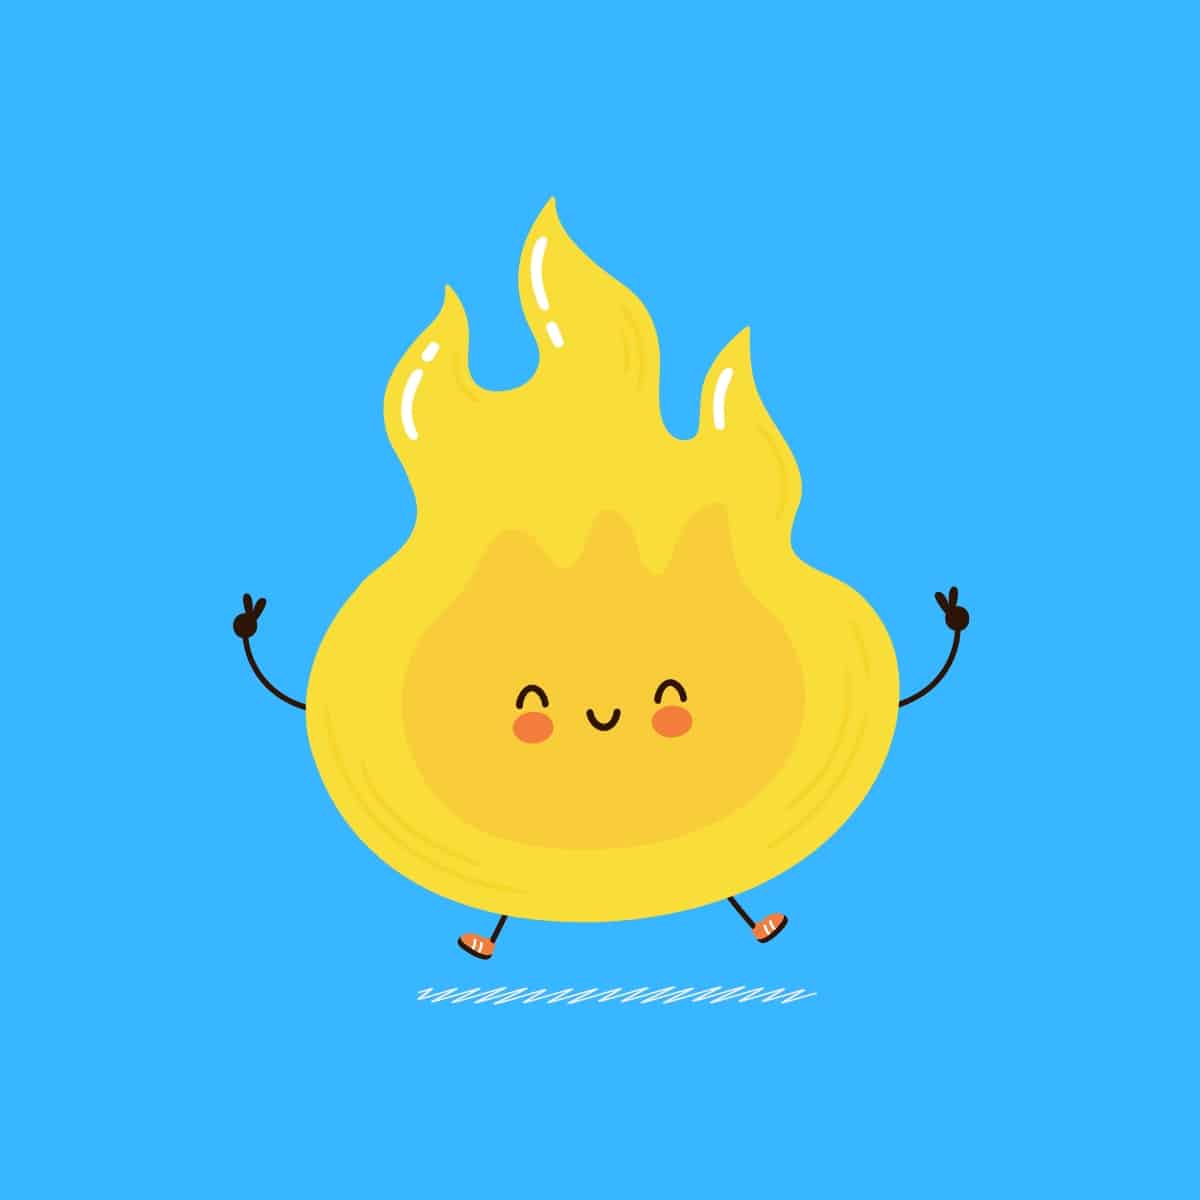 Cartoon graphic of a jumping yellow fire flame smiling on blue background.